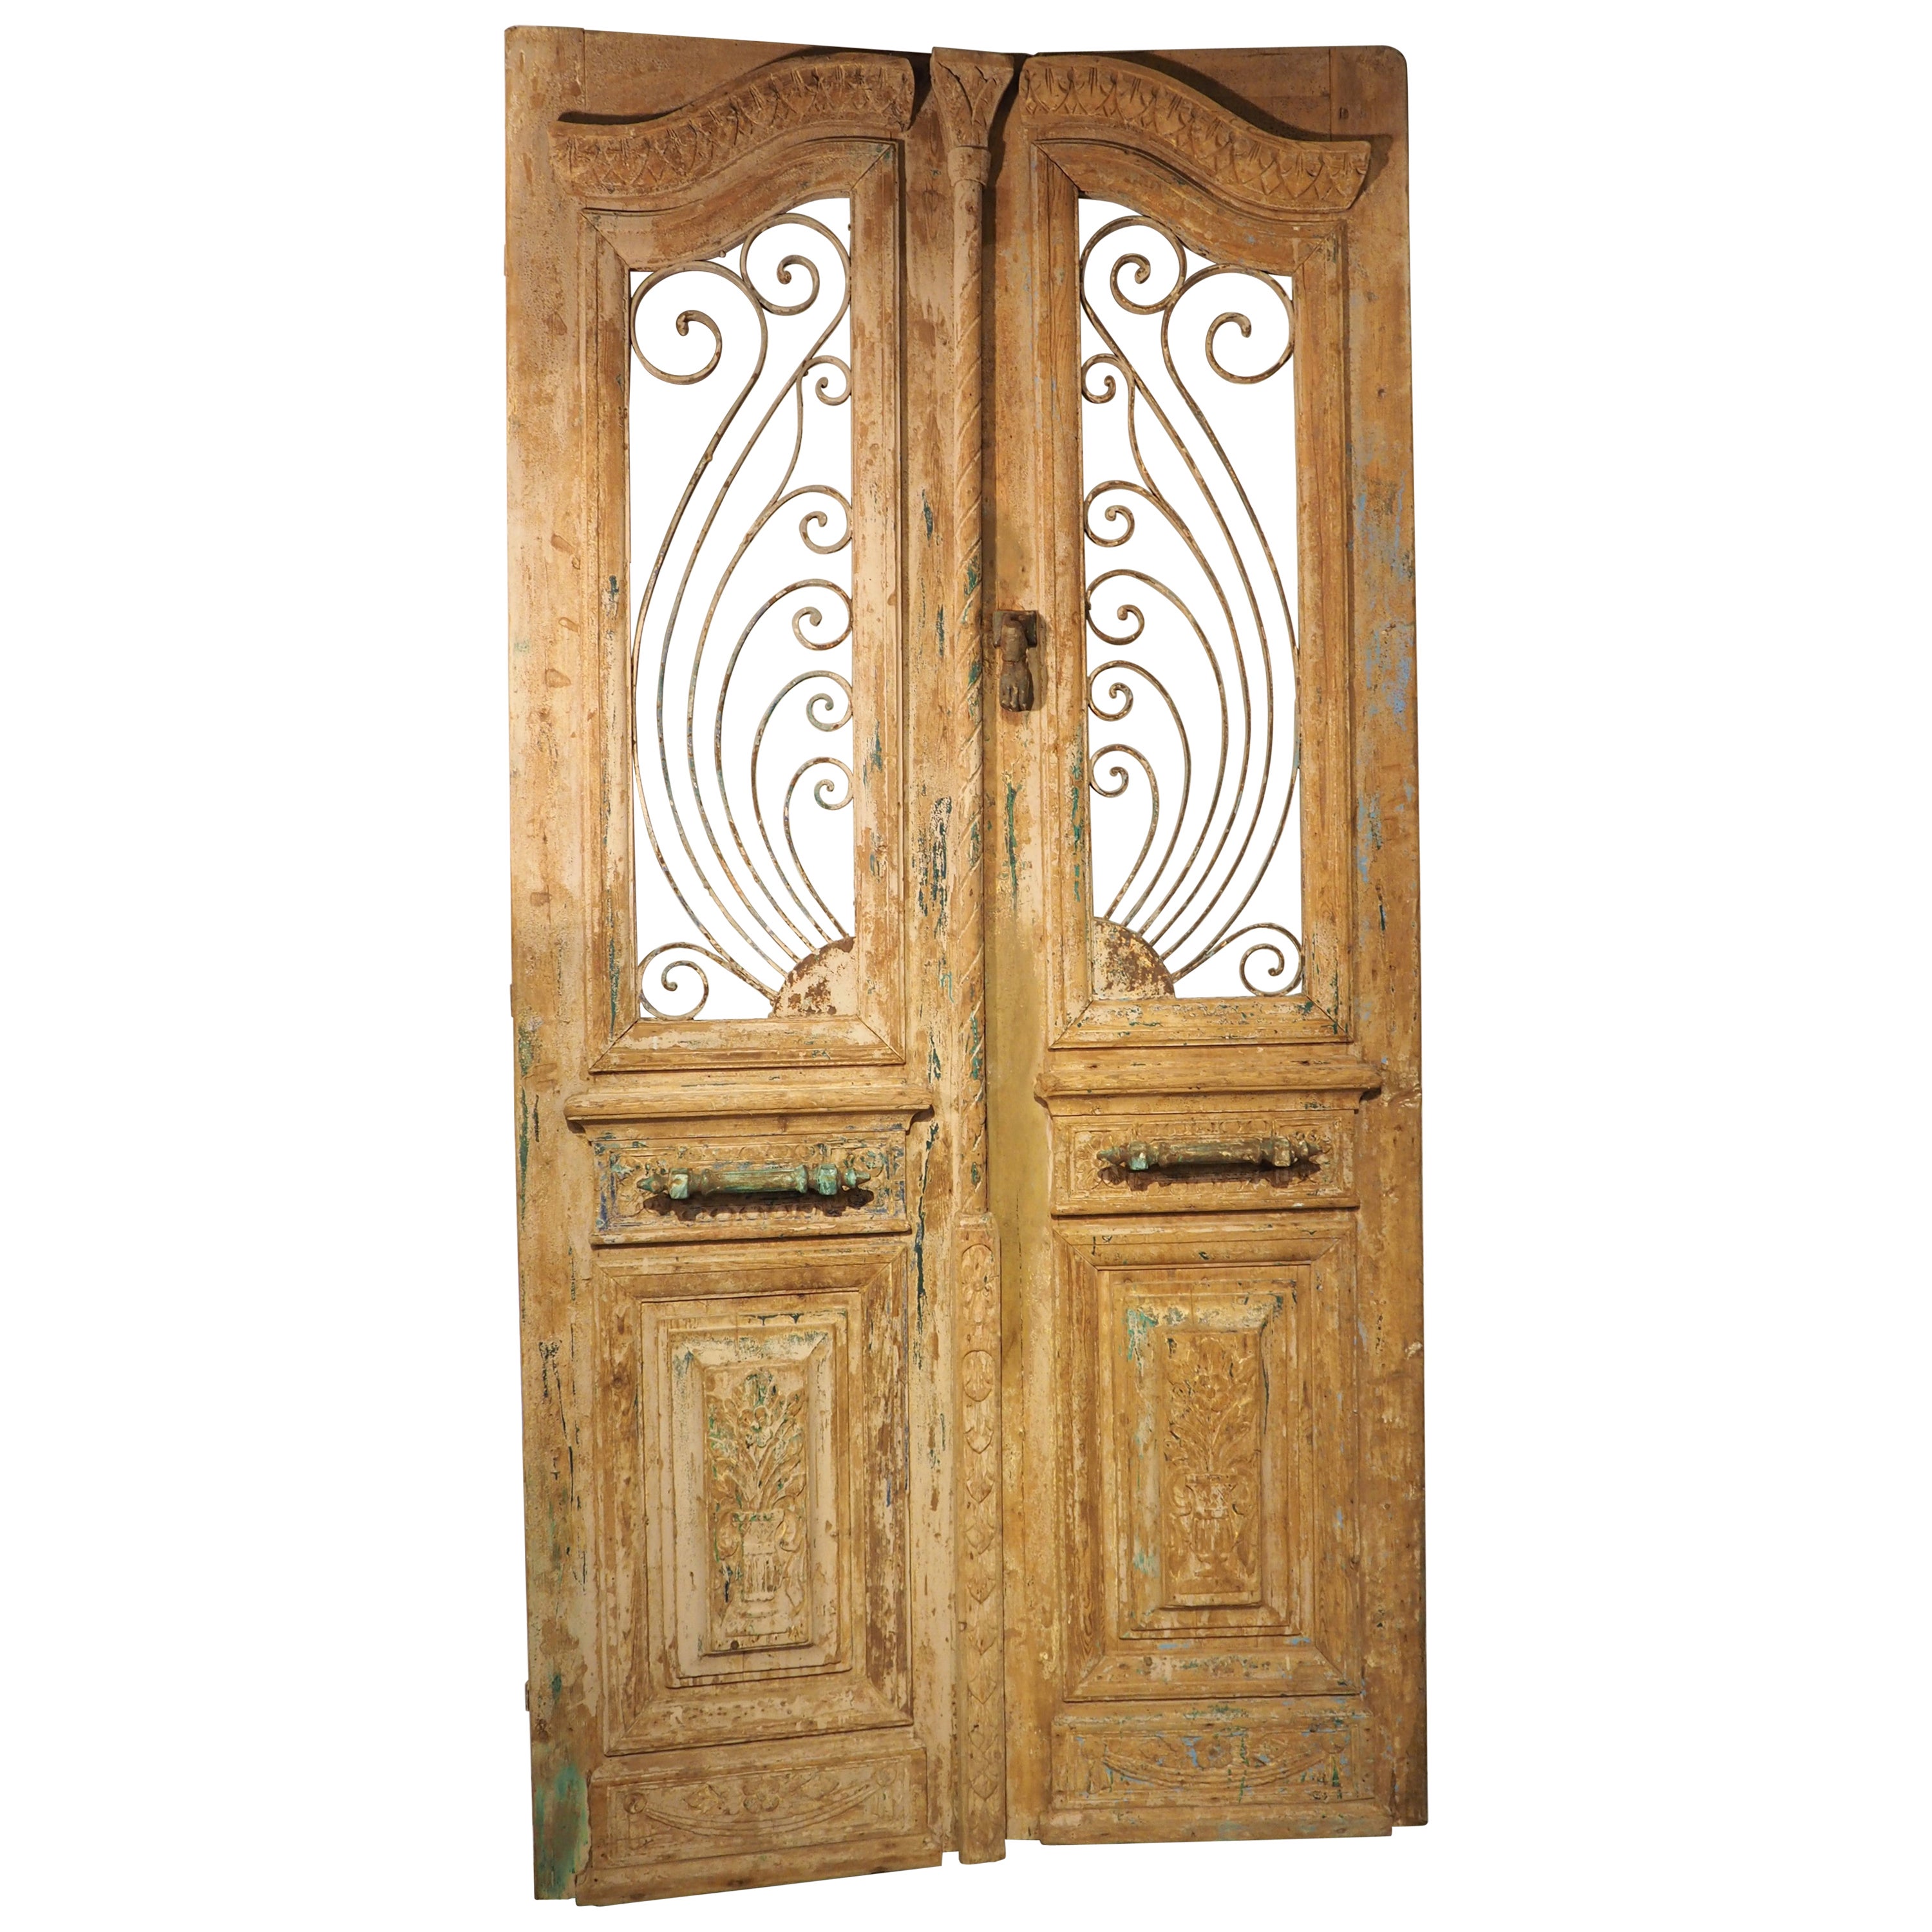 Pair of Circa 1900 French Art Nouveau Wood and Iron Doors For Sale